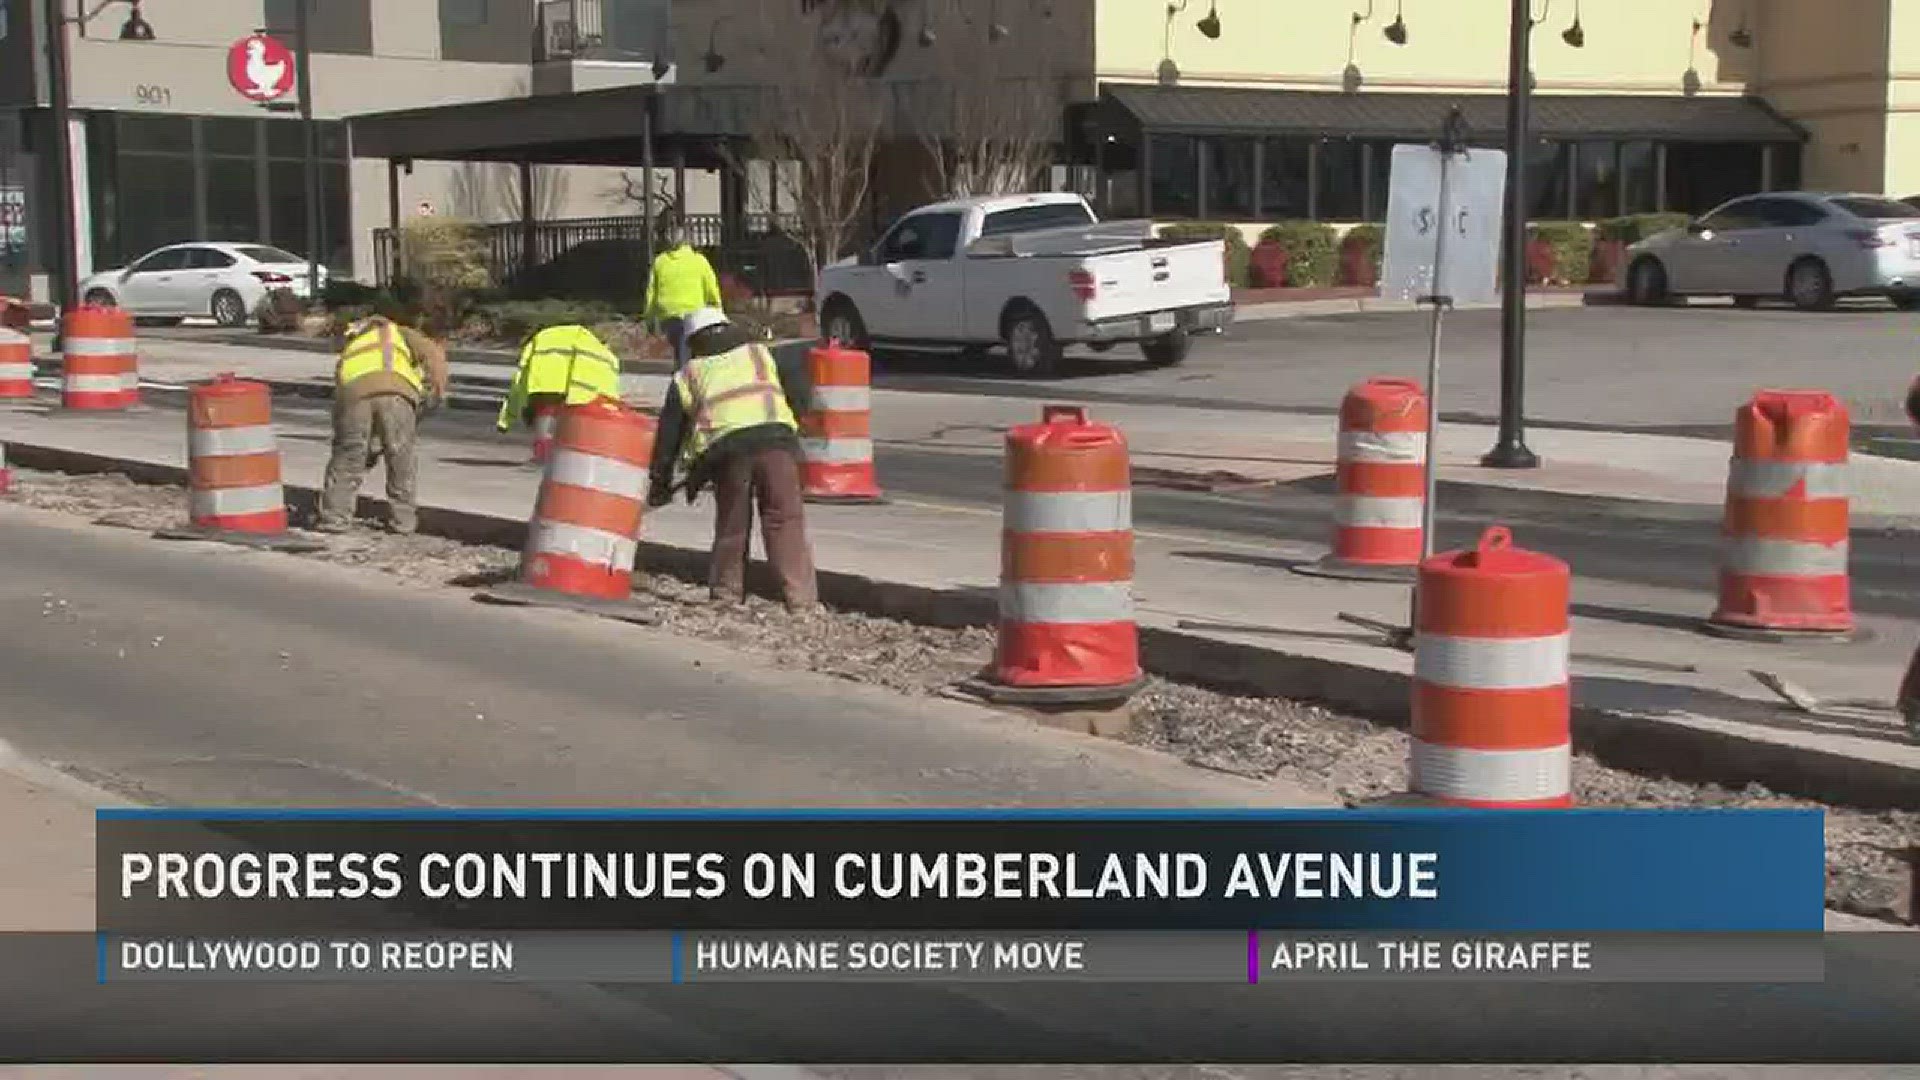 March 15, 2017: Cumberland Avenue drivers are adjusting to a new lane shift, as crews continue redesigning the street from four lanes to one in each direction with center turning points.